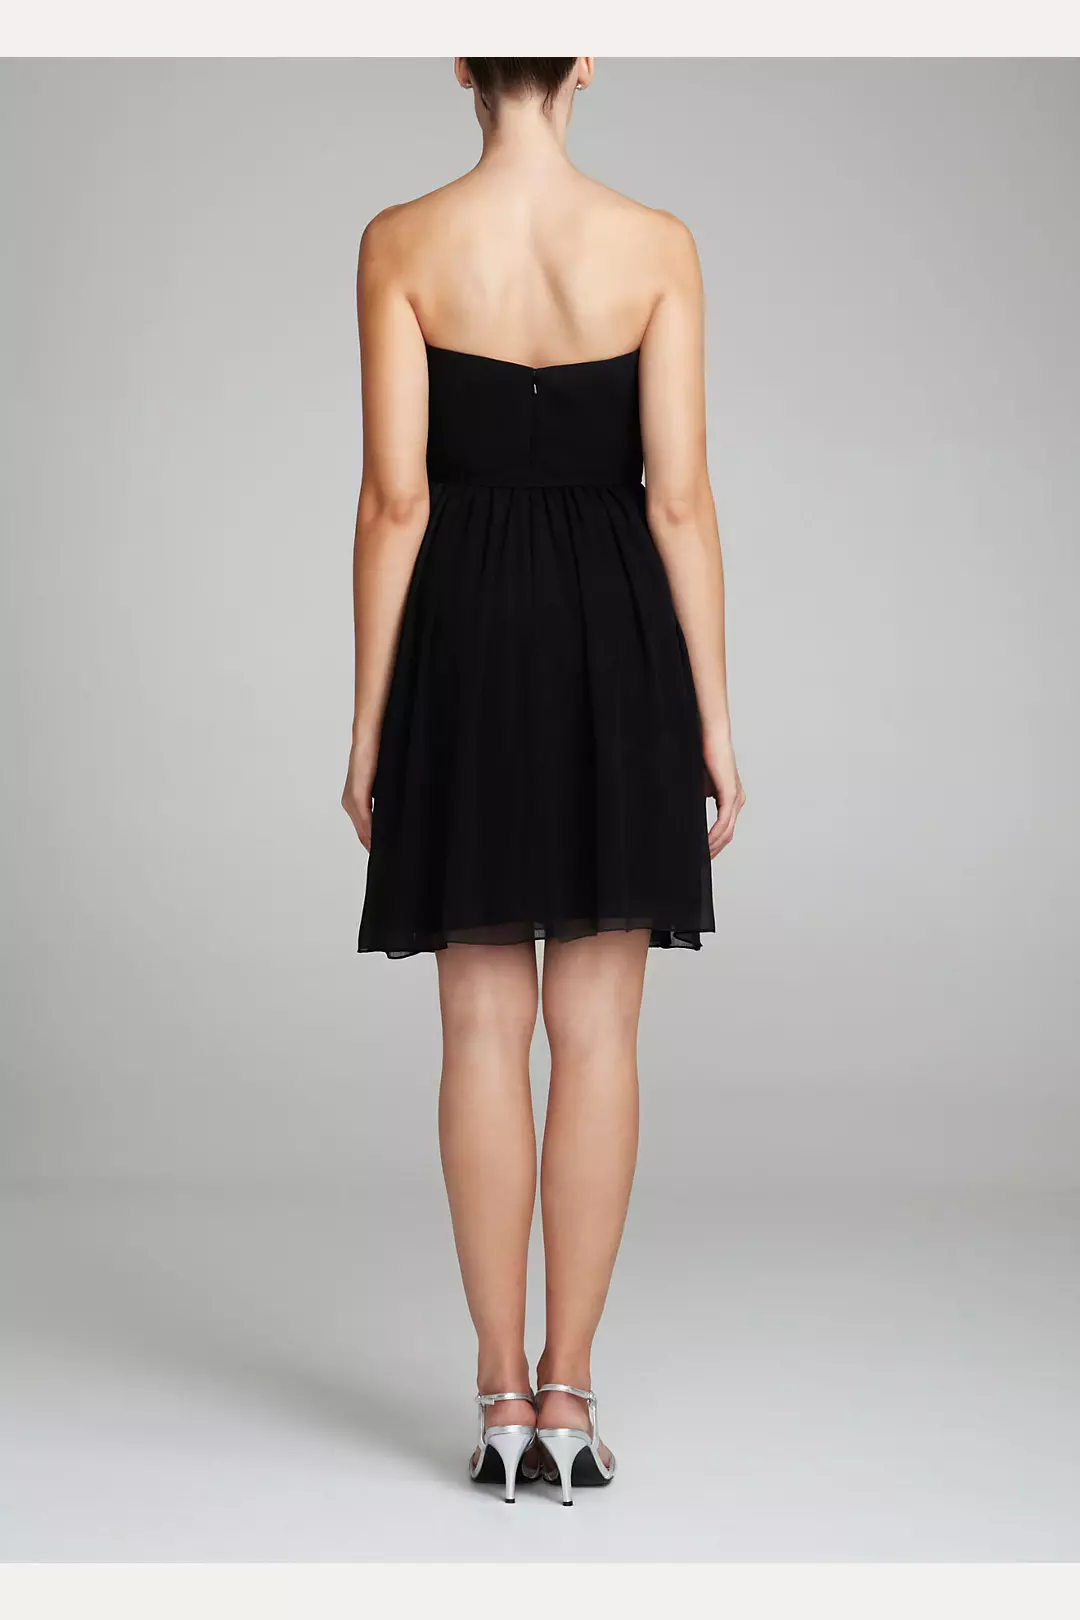 Strapless Crinkle Chiffon Dress with Beaded Detail Image 2